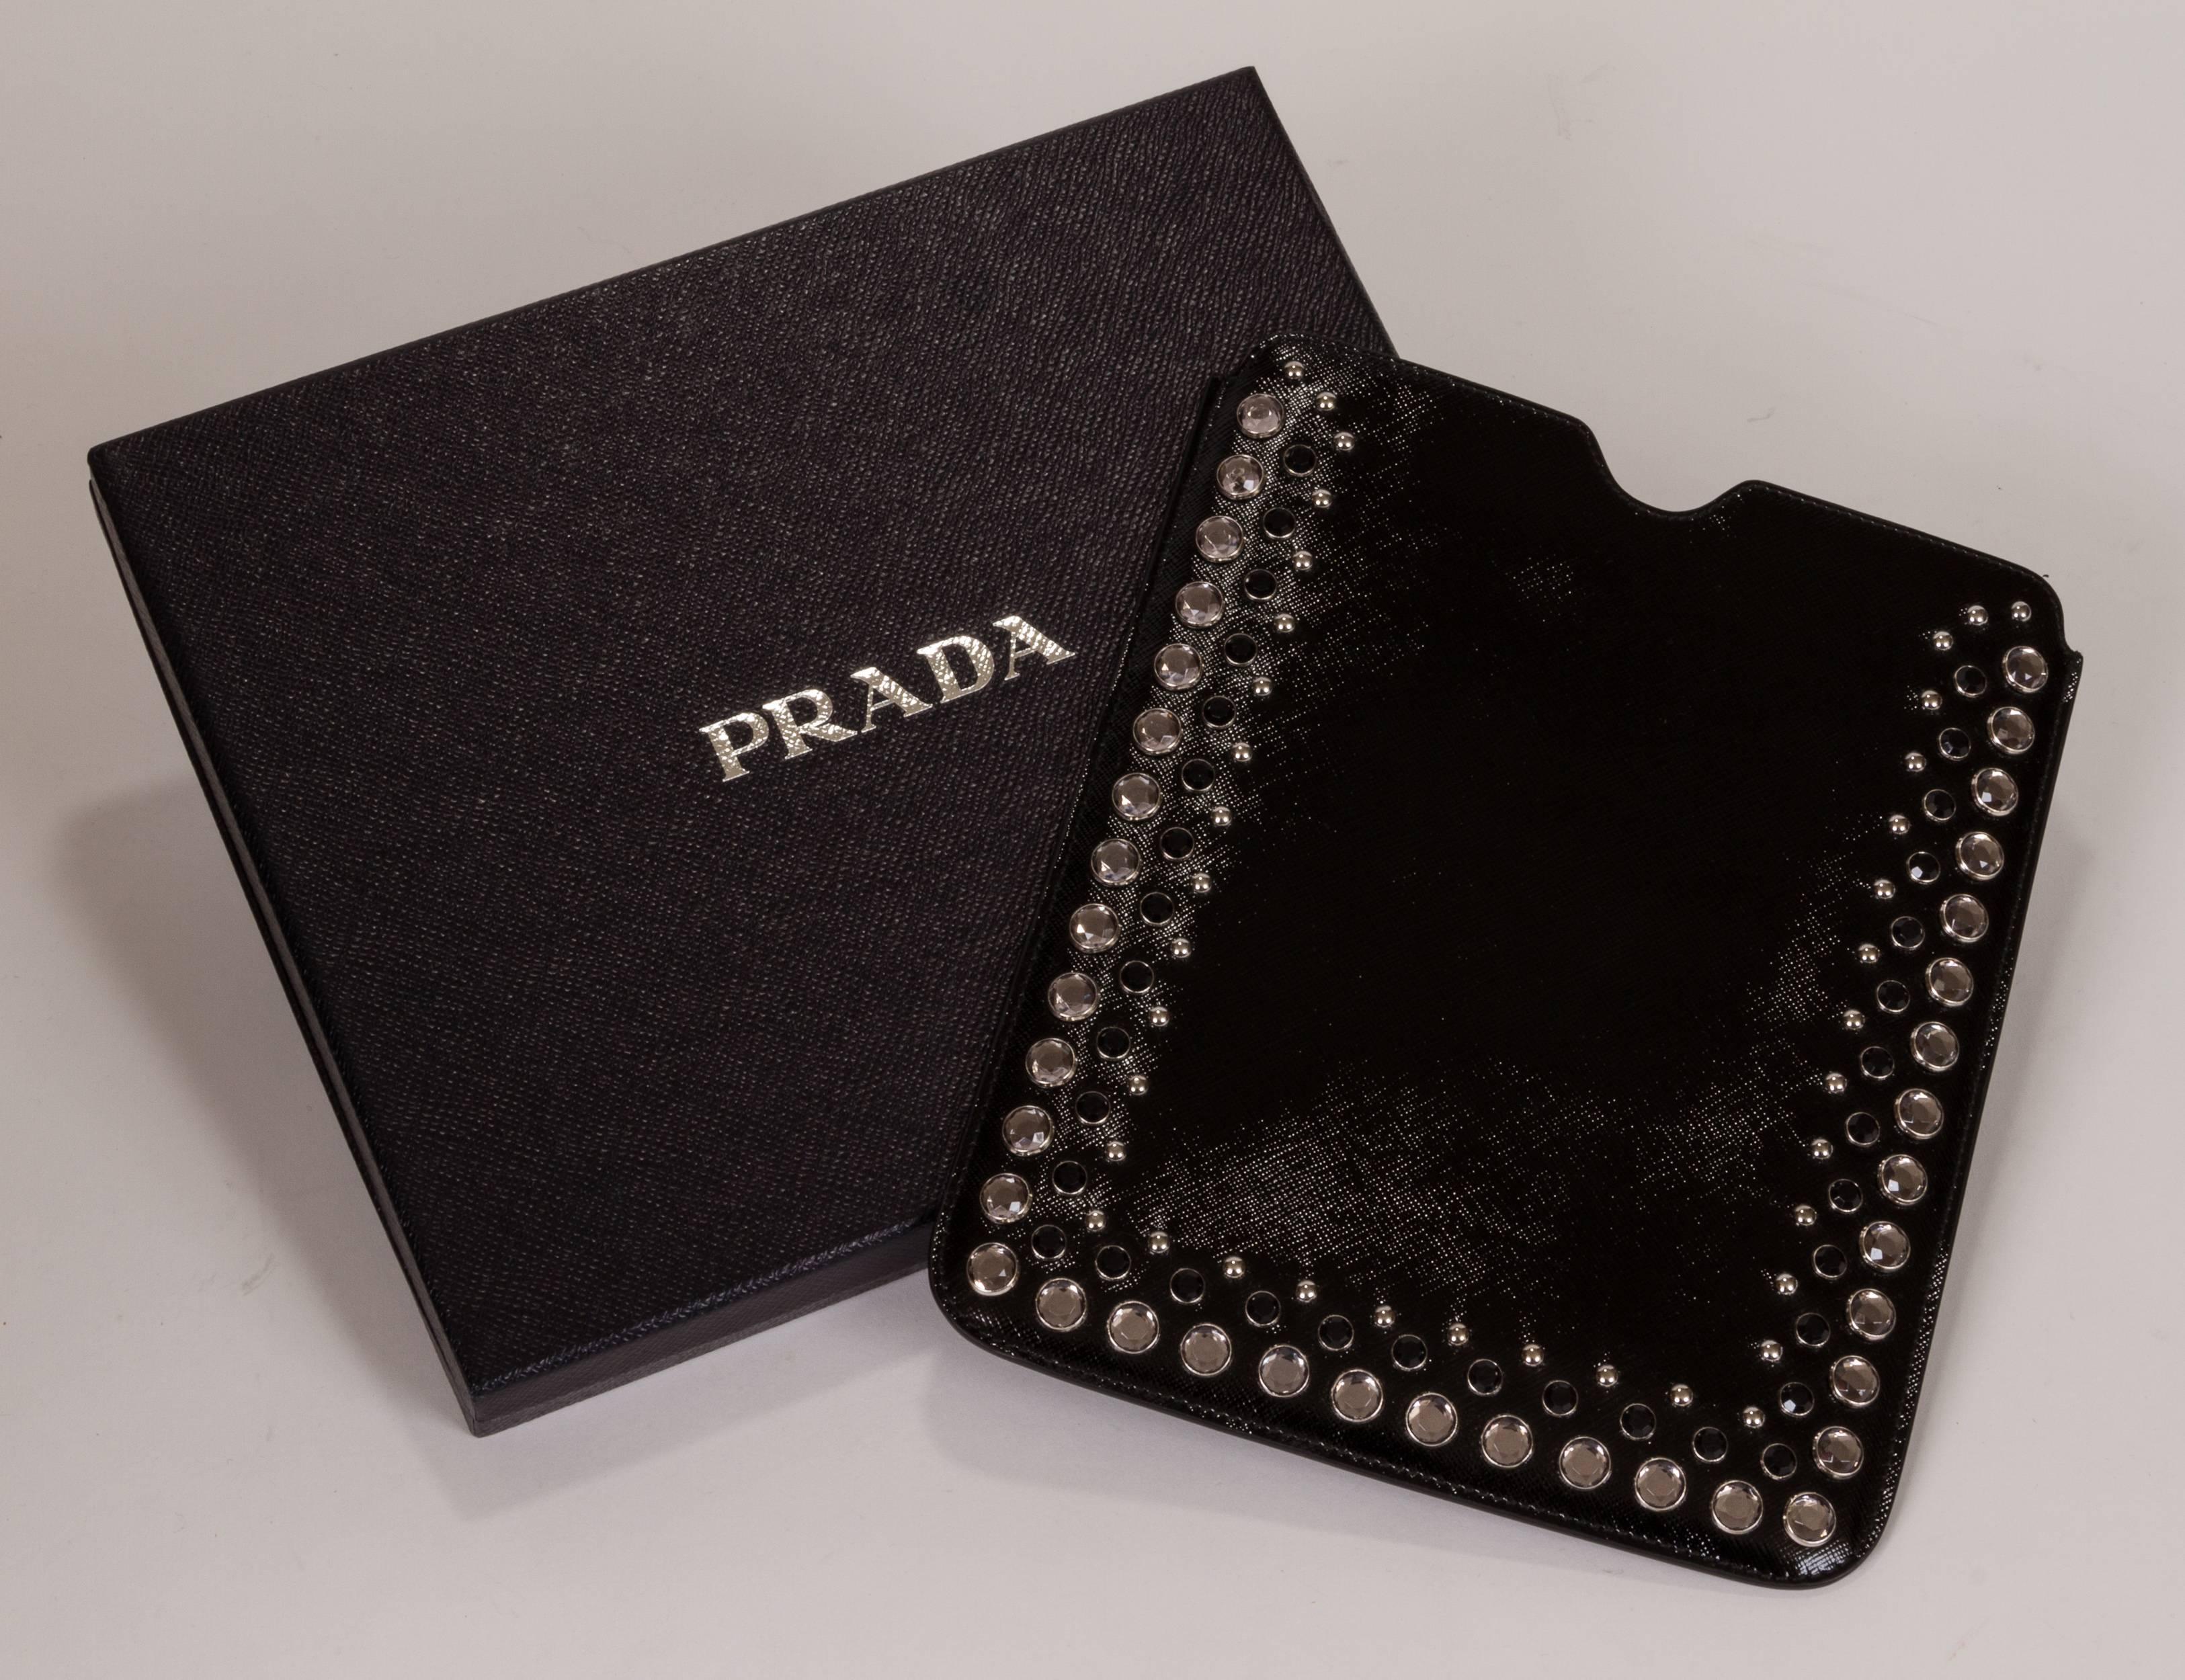 New with tags, bejeweled ipad cover case. Glossy saffiano leather in black white with gray jewels.Butter lambskin leather interior. Gold tone Prada lettering. Comes with original box, warranty and tag.